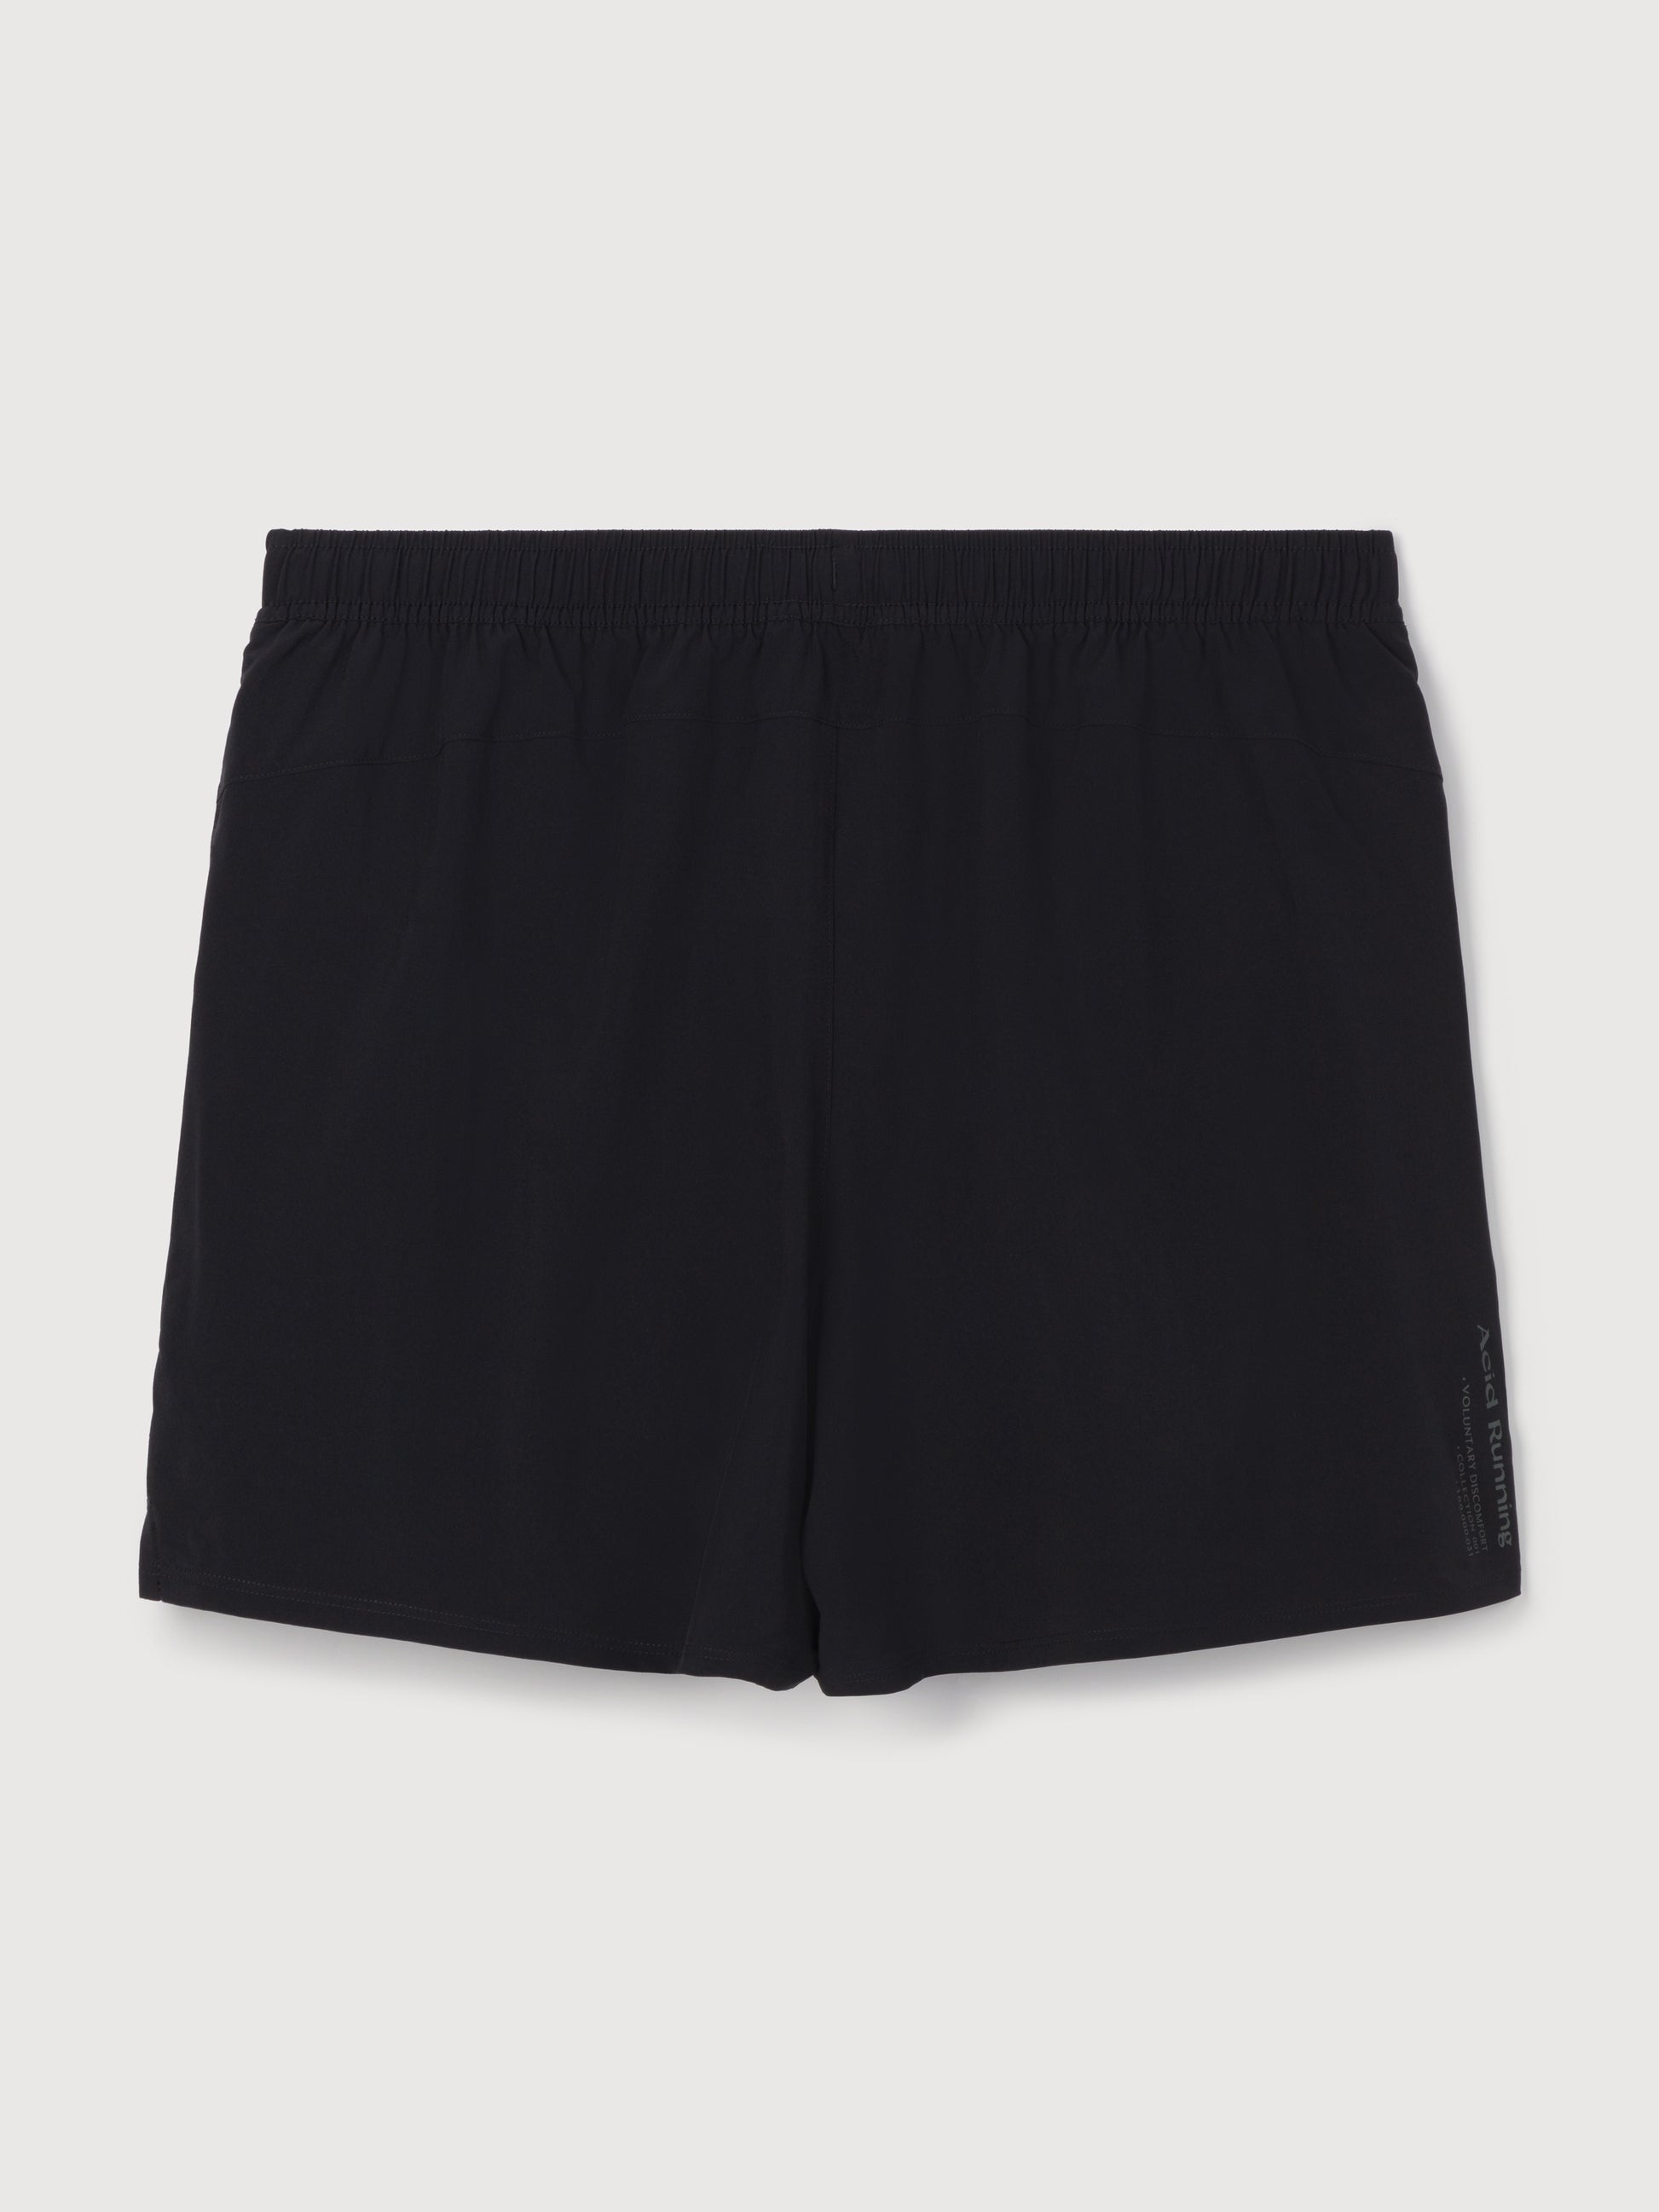 Acid Running 2-in-1 Shorts in Black - Sustainable Materials